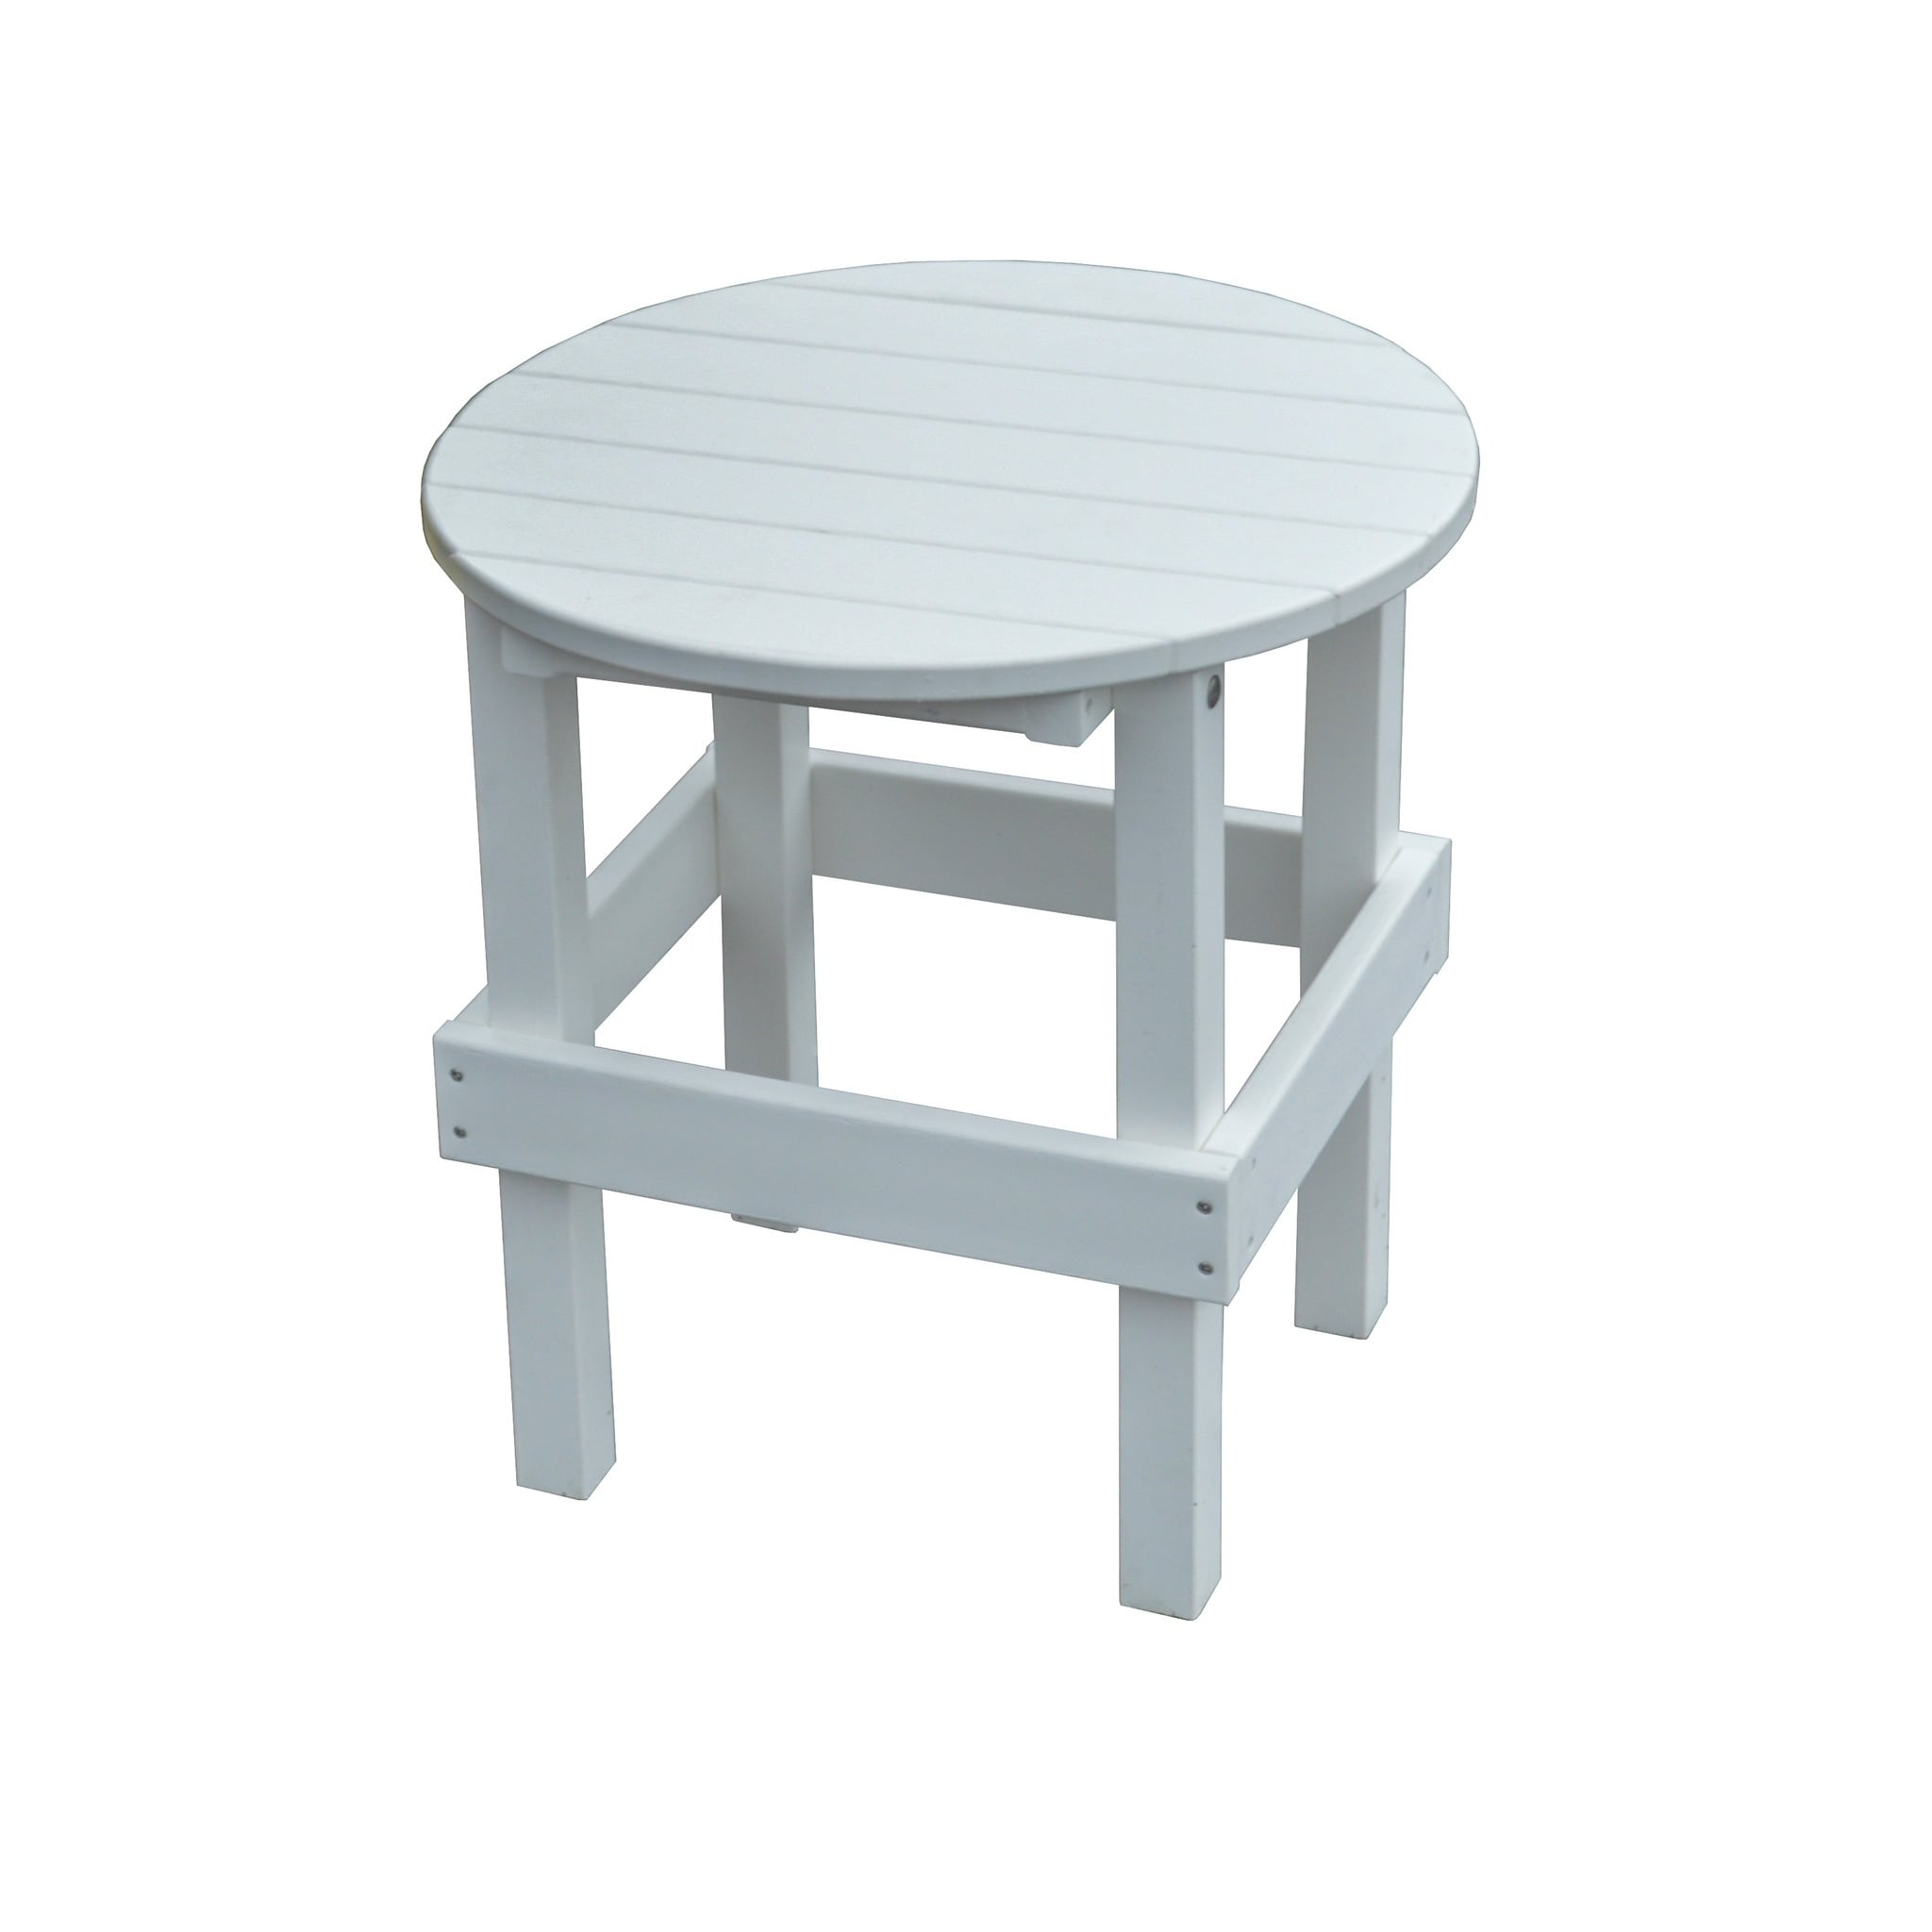 Recycled Plastic Blue and White Poly Lumber Outdoor Deluxe End Table